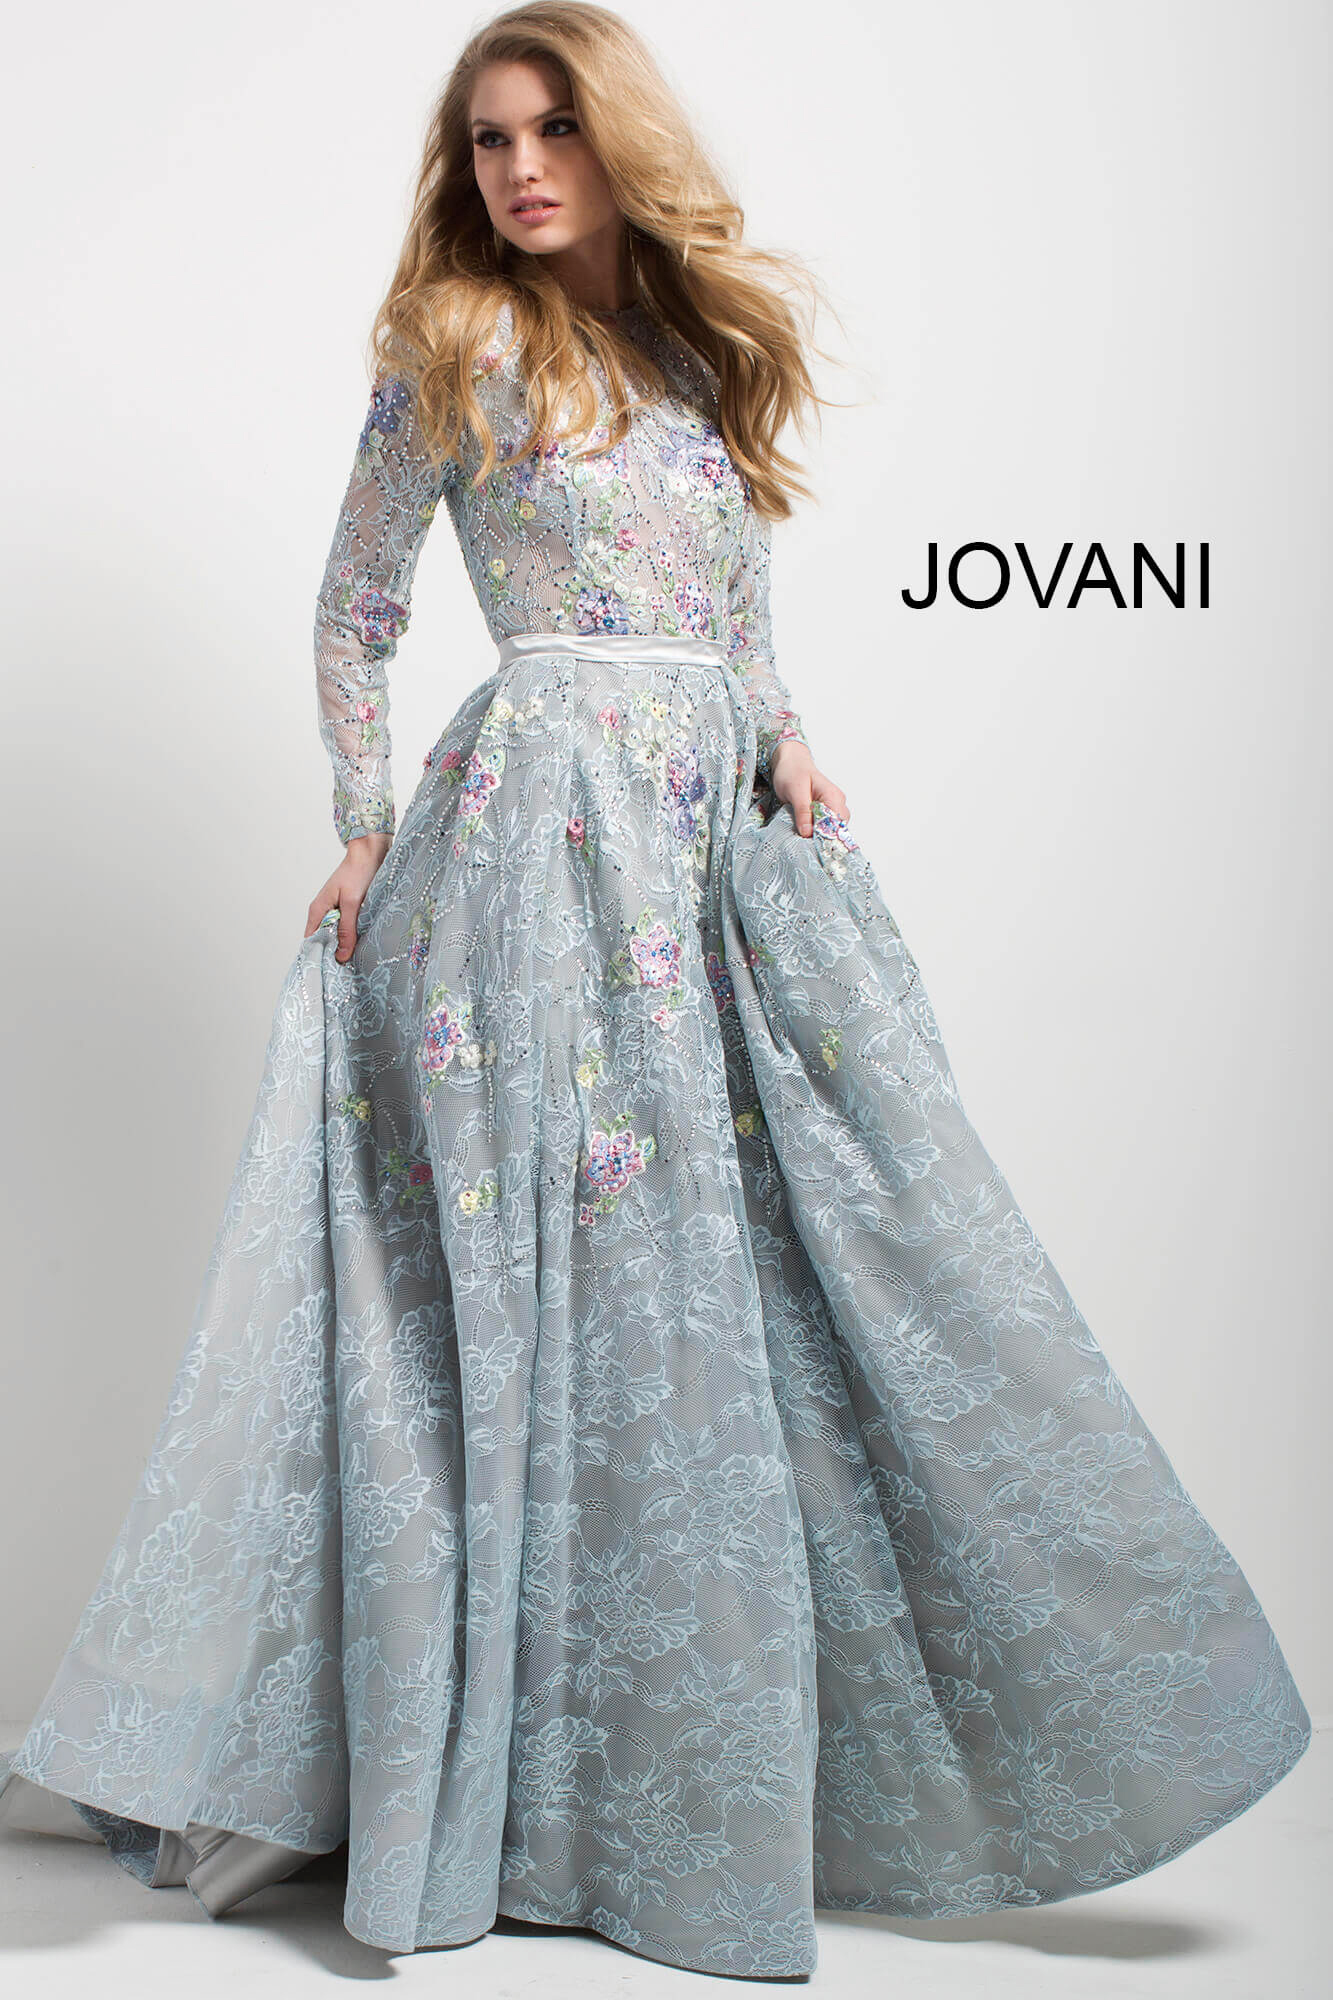 Jovani 54550 | Light Blue Lace Embroidered Floral Gown